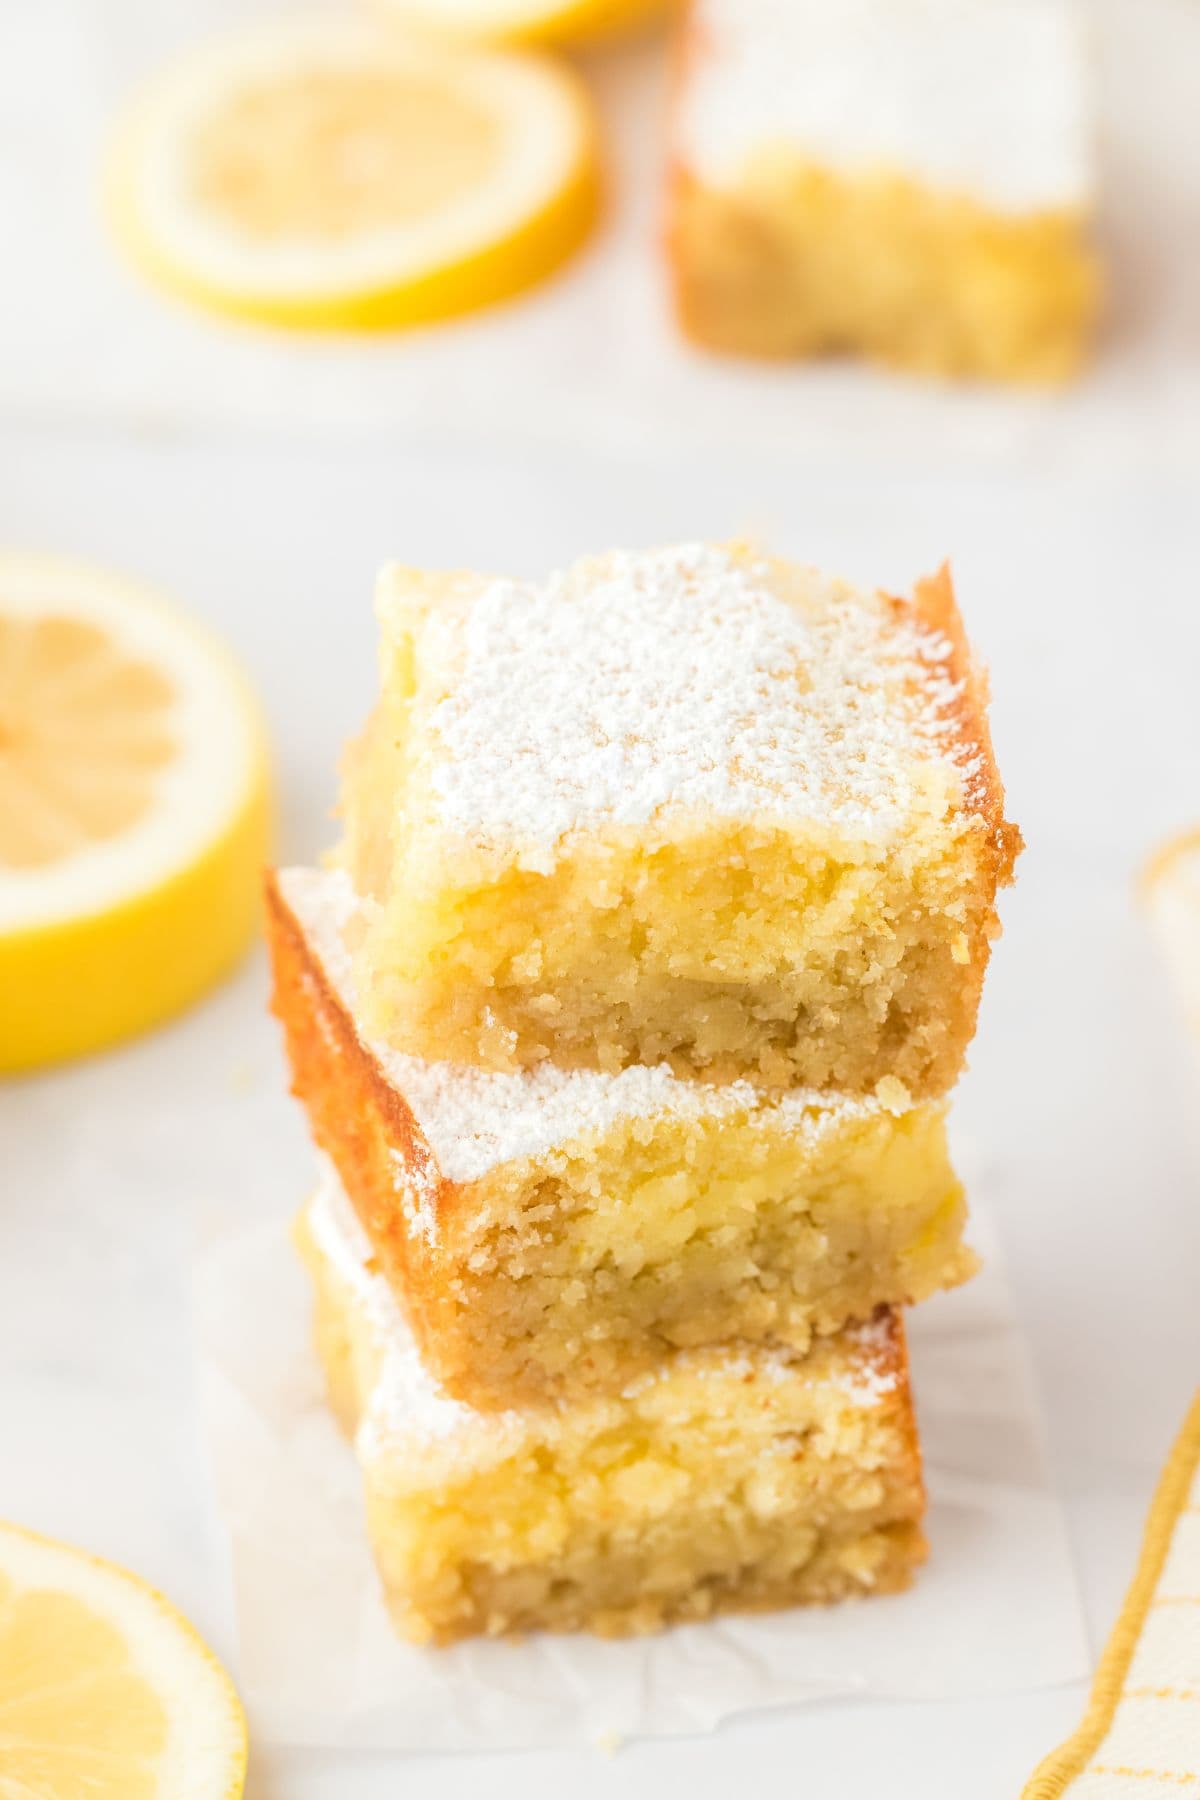 A stack of three lemon brownies on the table dusted with powdered sugar.